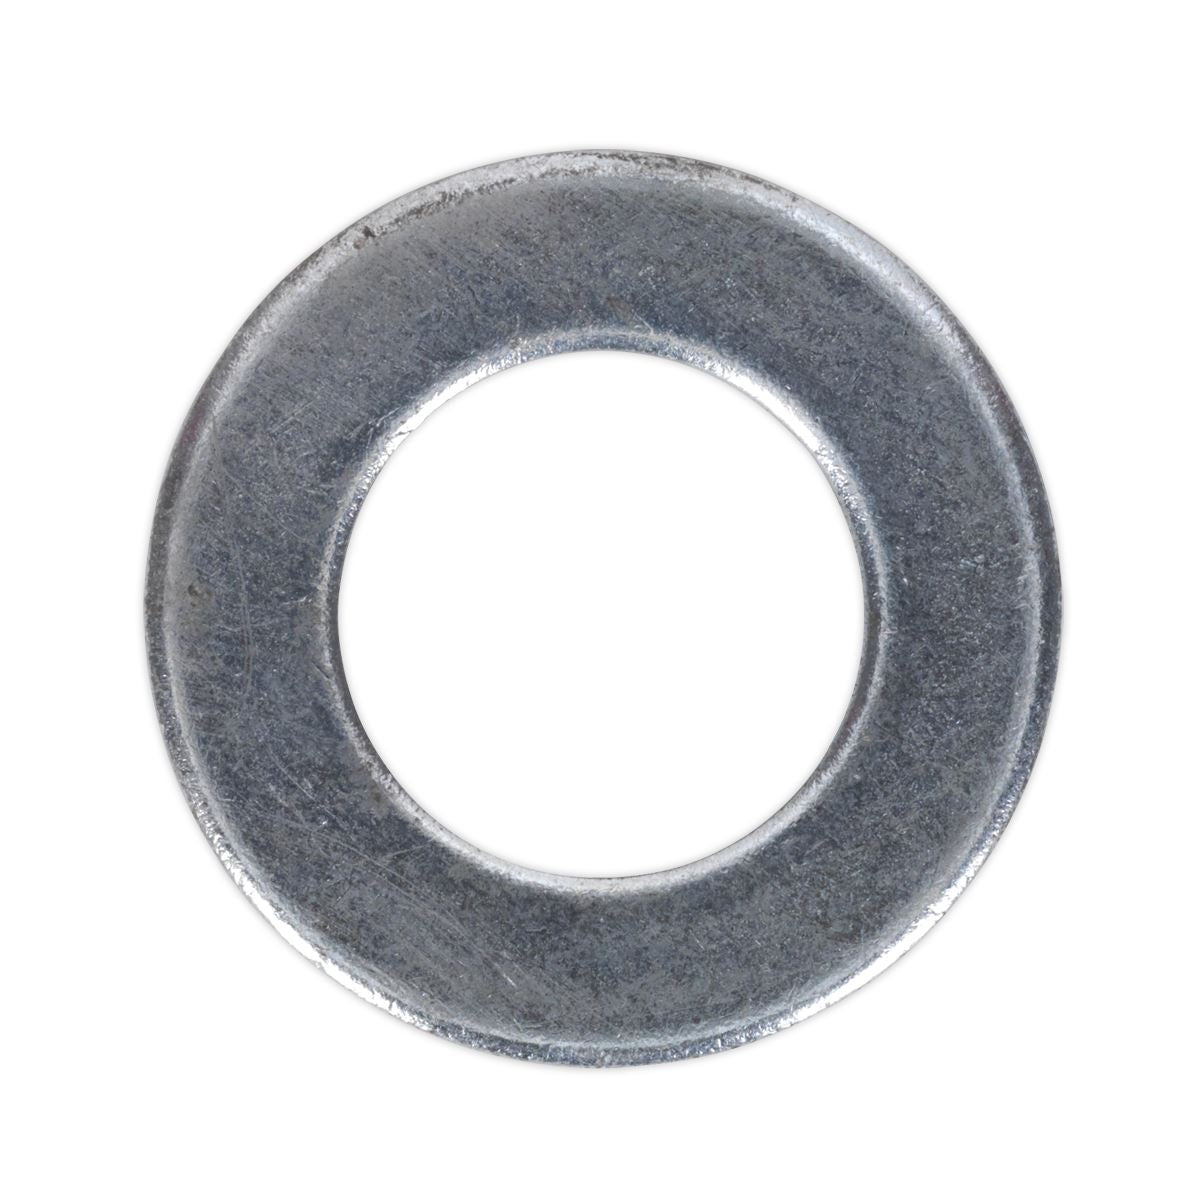 Sealey Flat Washer M20 x 39mm Form C Pack of 50